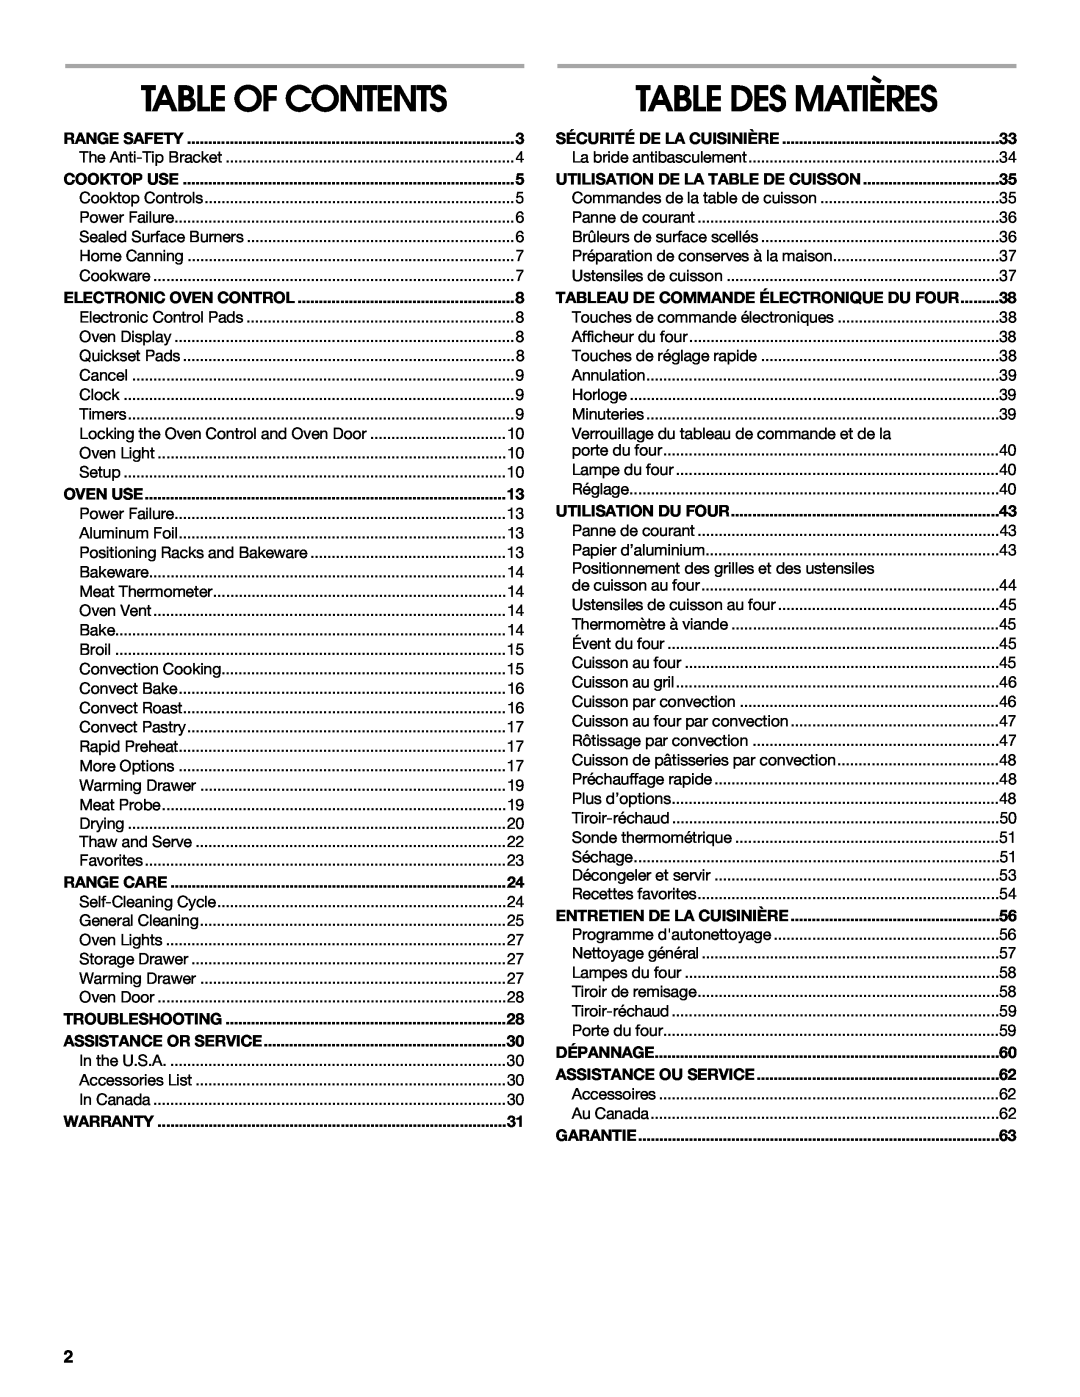 Jenn-Air JGS8850 manual Table Of Contents, Table Des Matières, Range Safety, Cooktop Use, Electronic Oven Control, Oven Use 